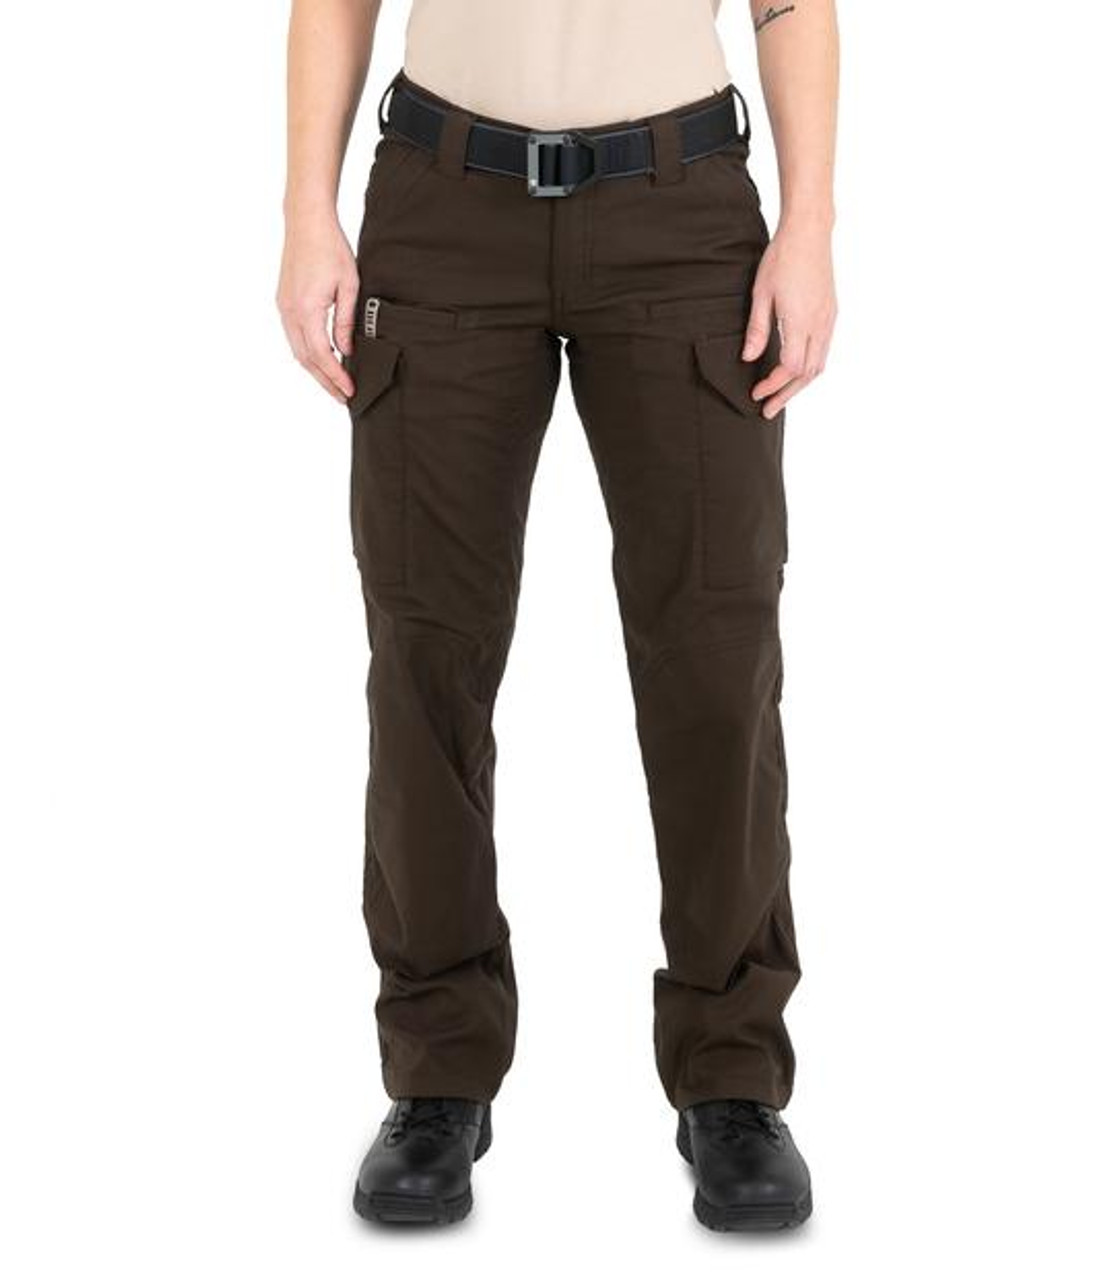 First Tactical Womens V2 Tactical Pants